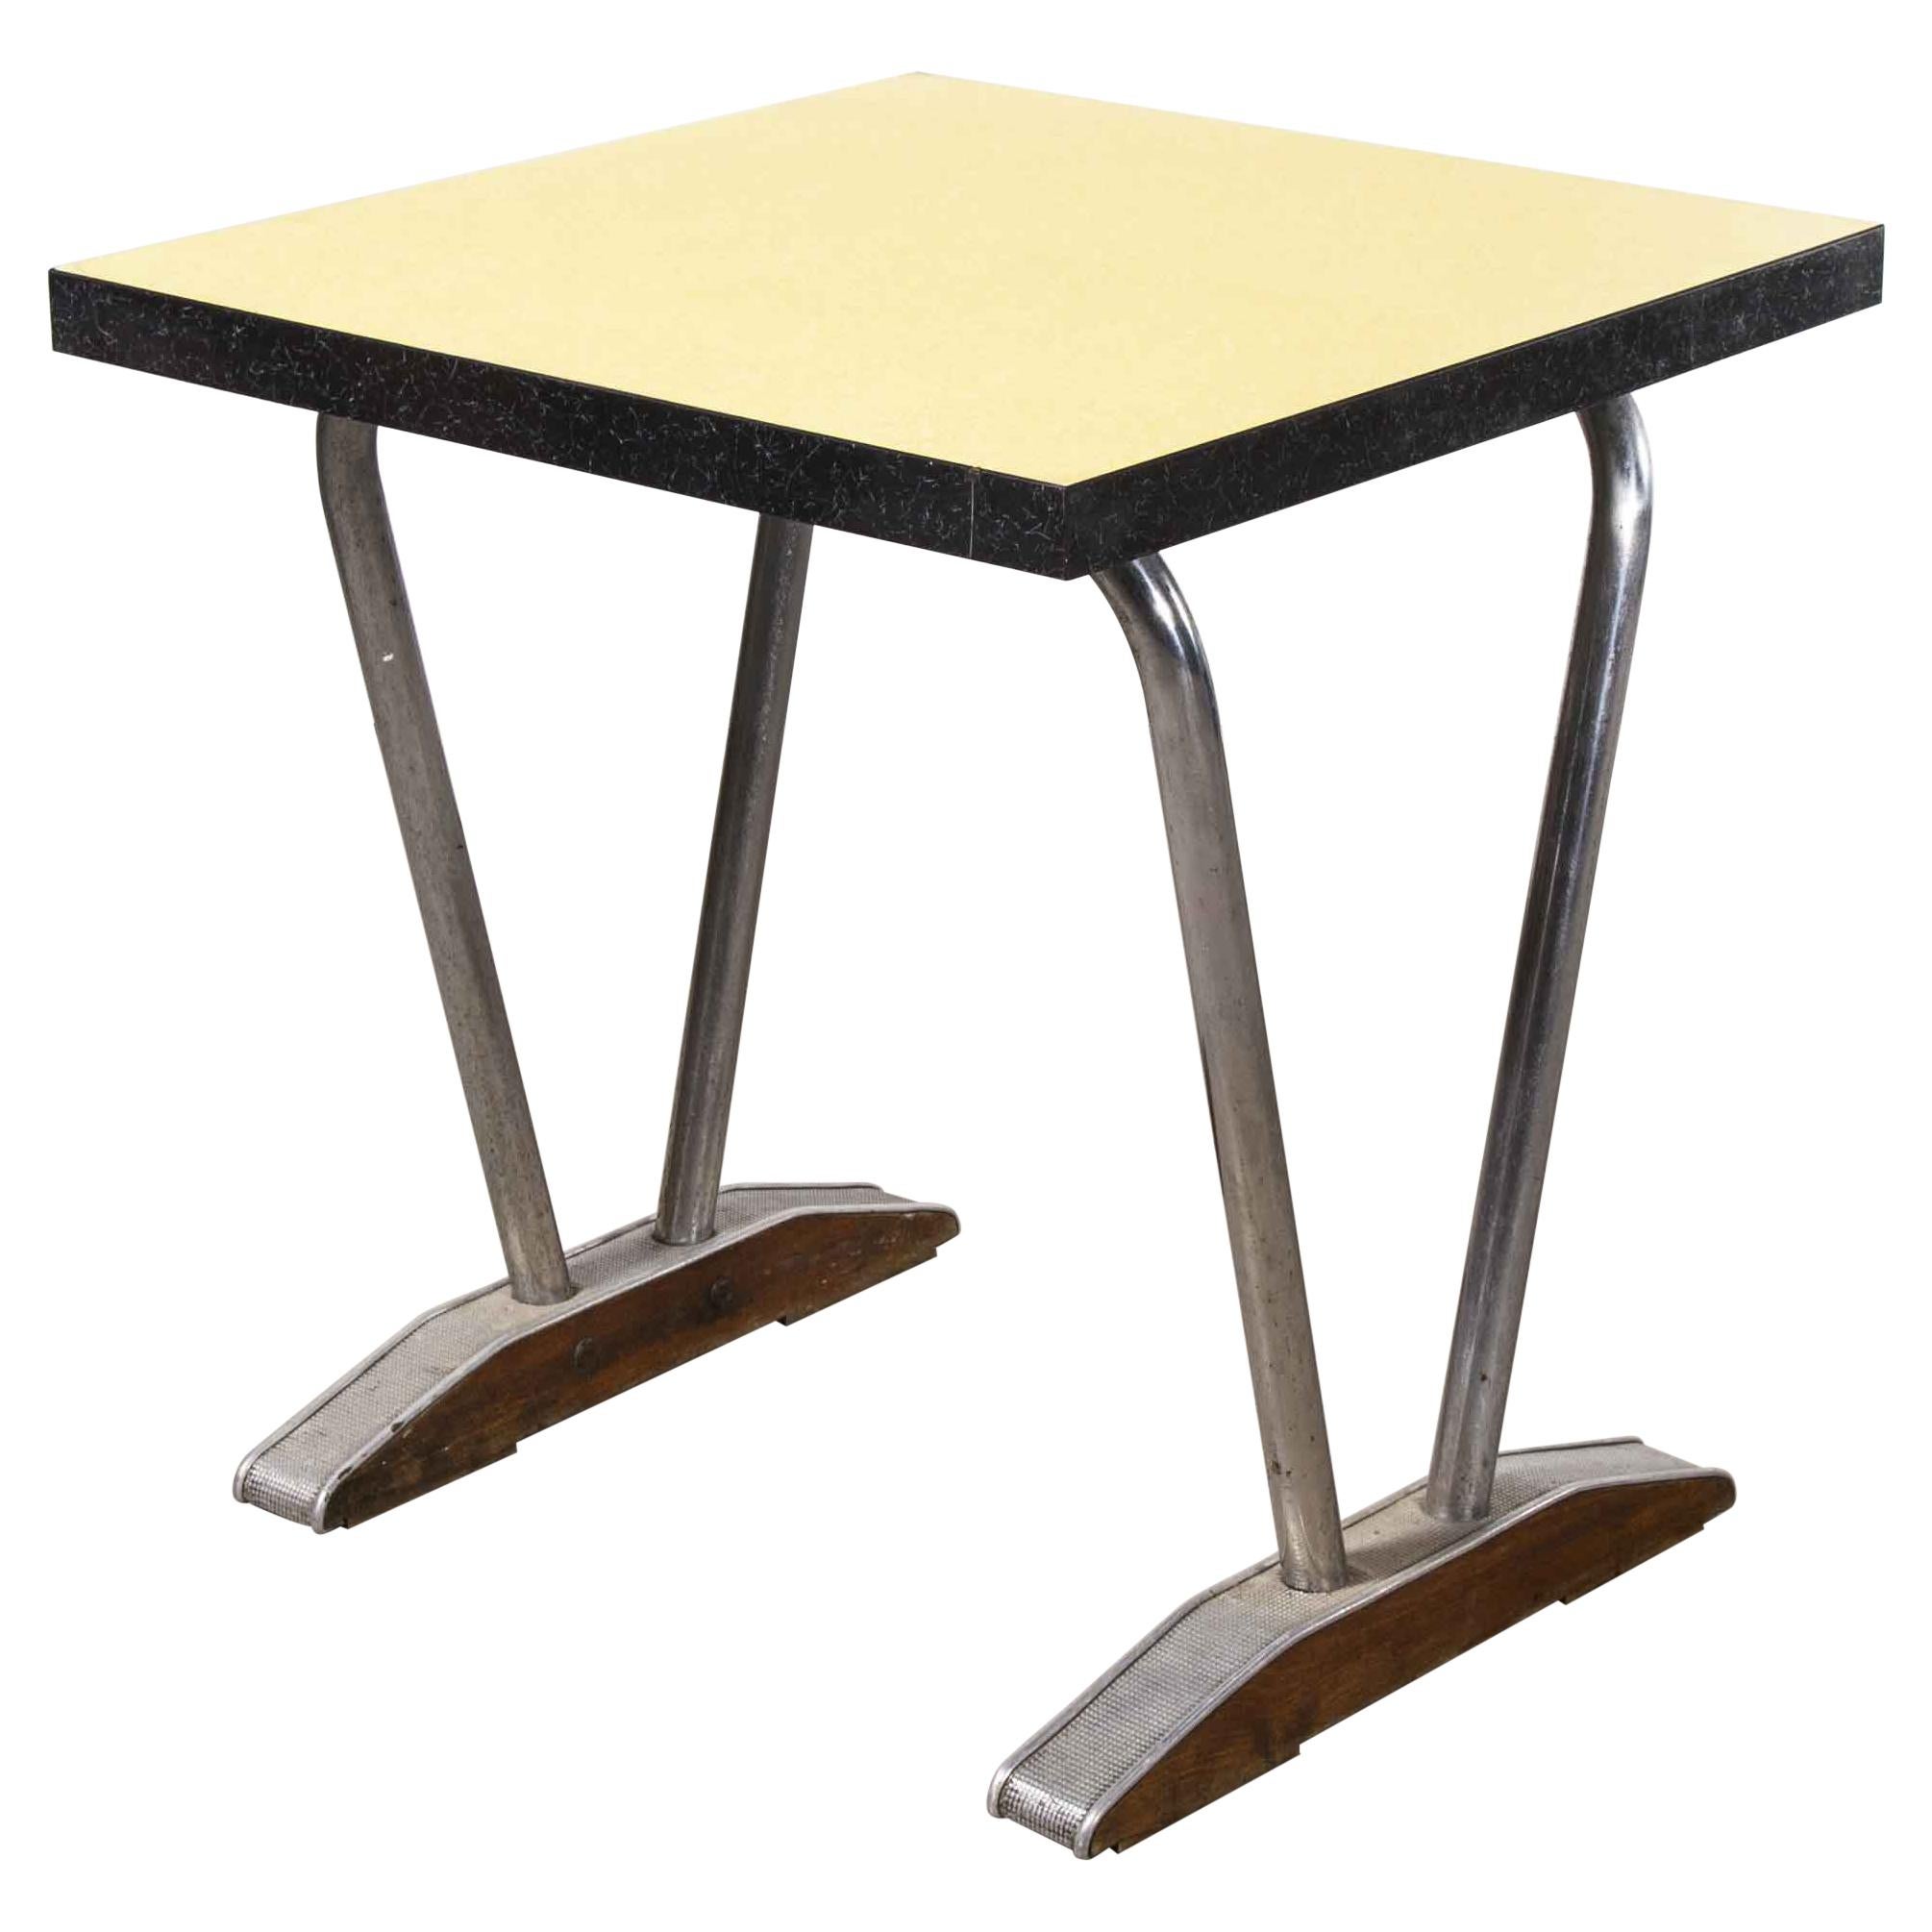 1960’s French Yellow Laminate Café Table with Aluminium Base, Square